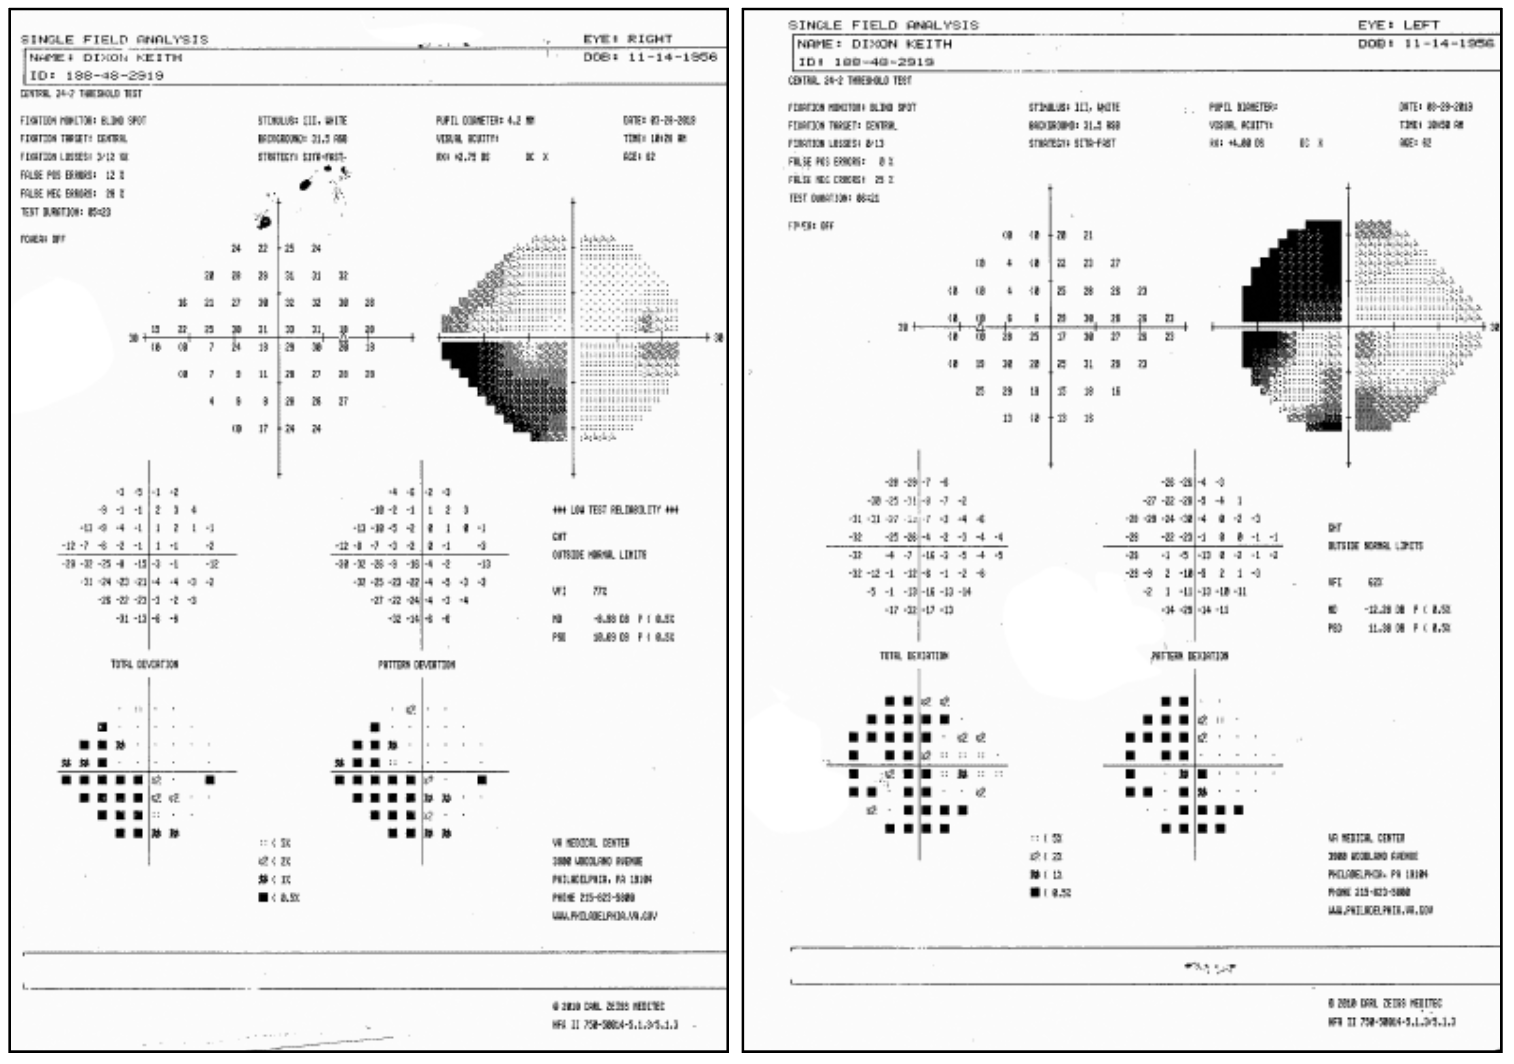 The patient’s visual field results (OD at left, OS at right).